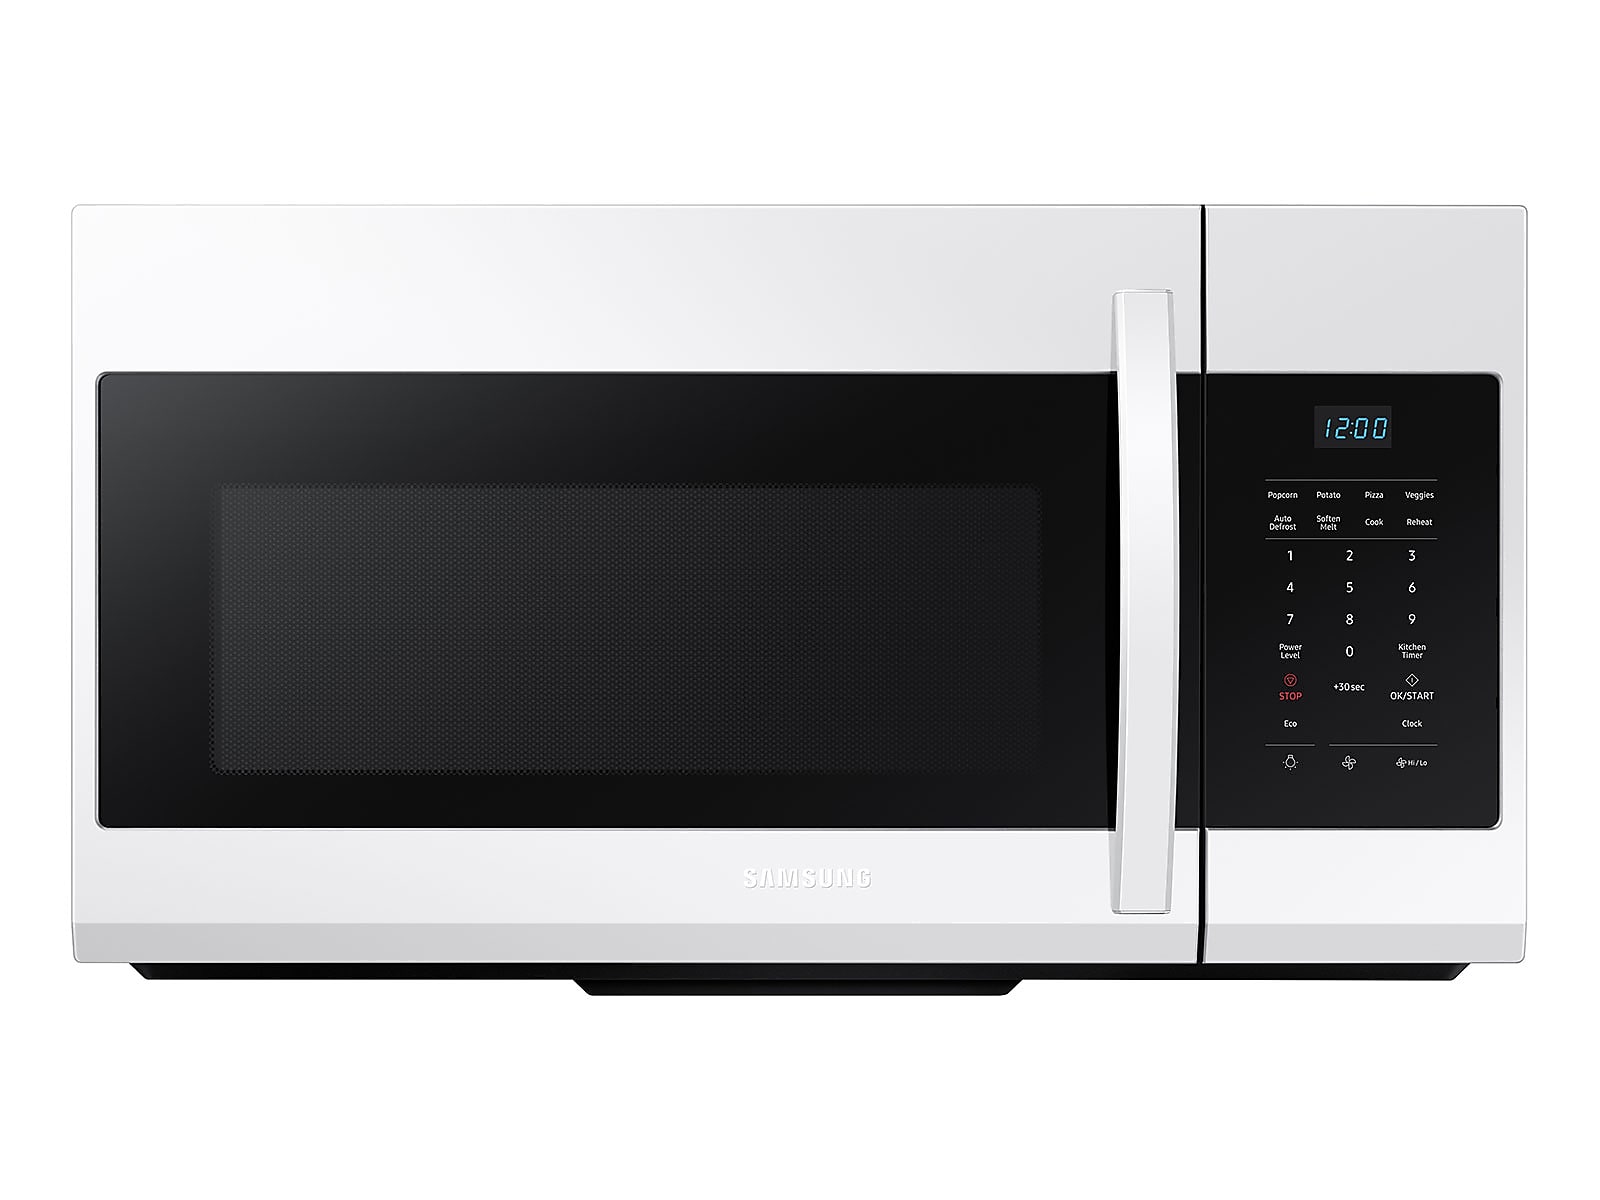 Samsung 1.7 cu. ft. Over-the-Range Microwave in White(ME17R7021EW/AA) photo